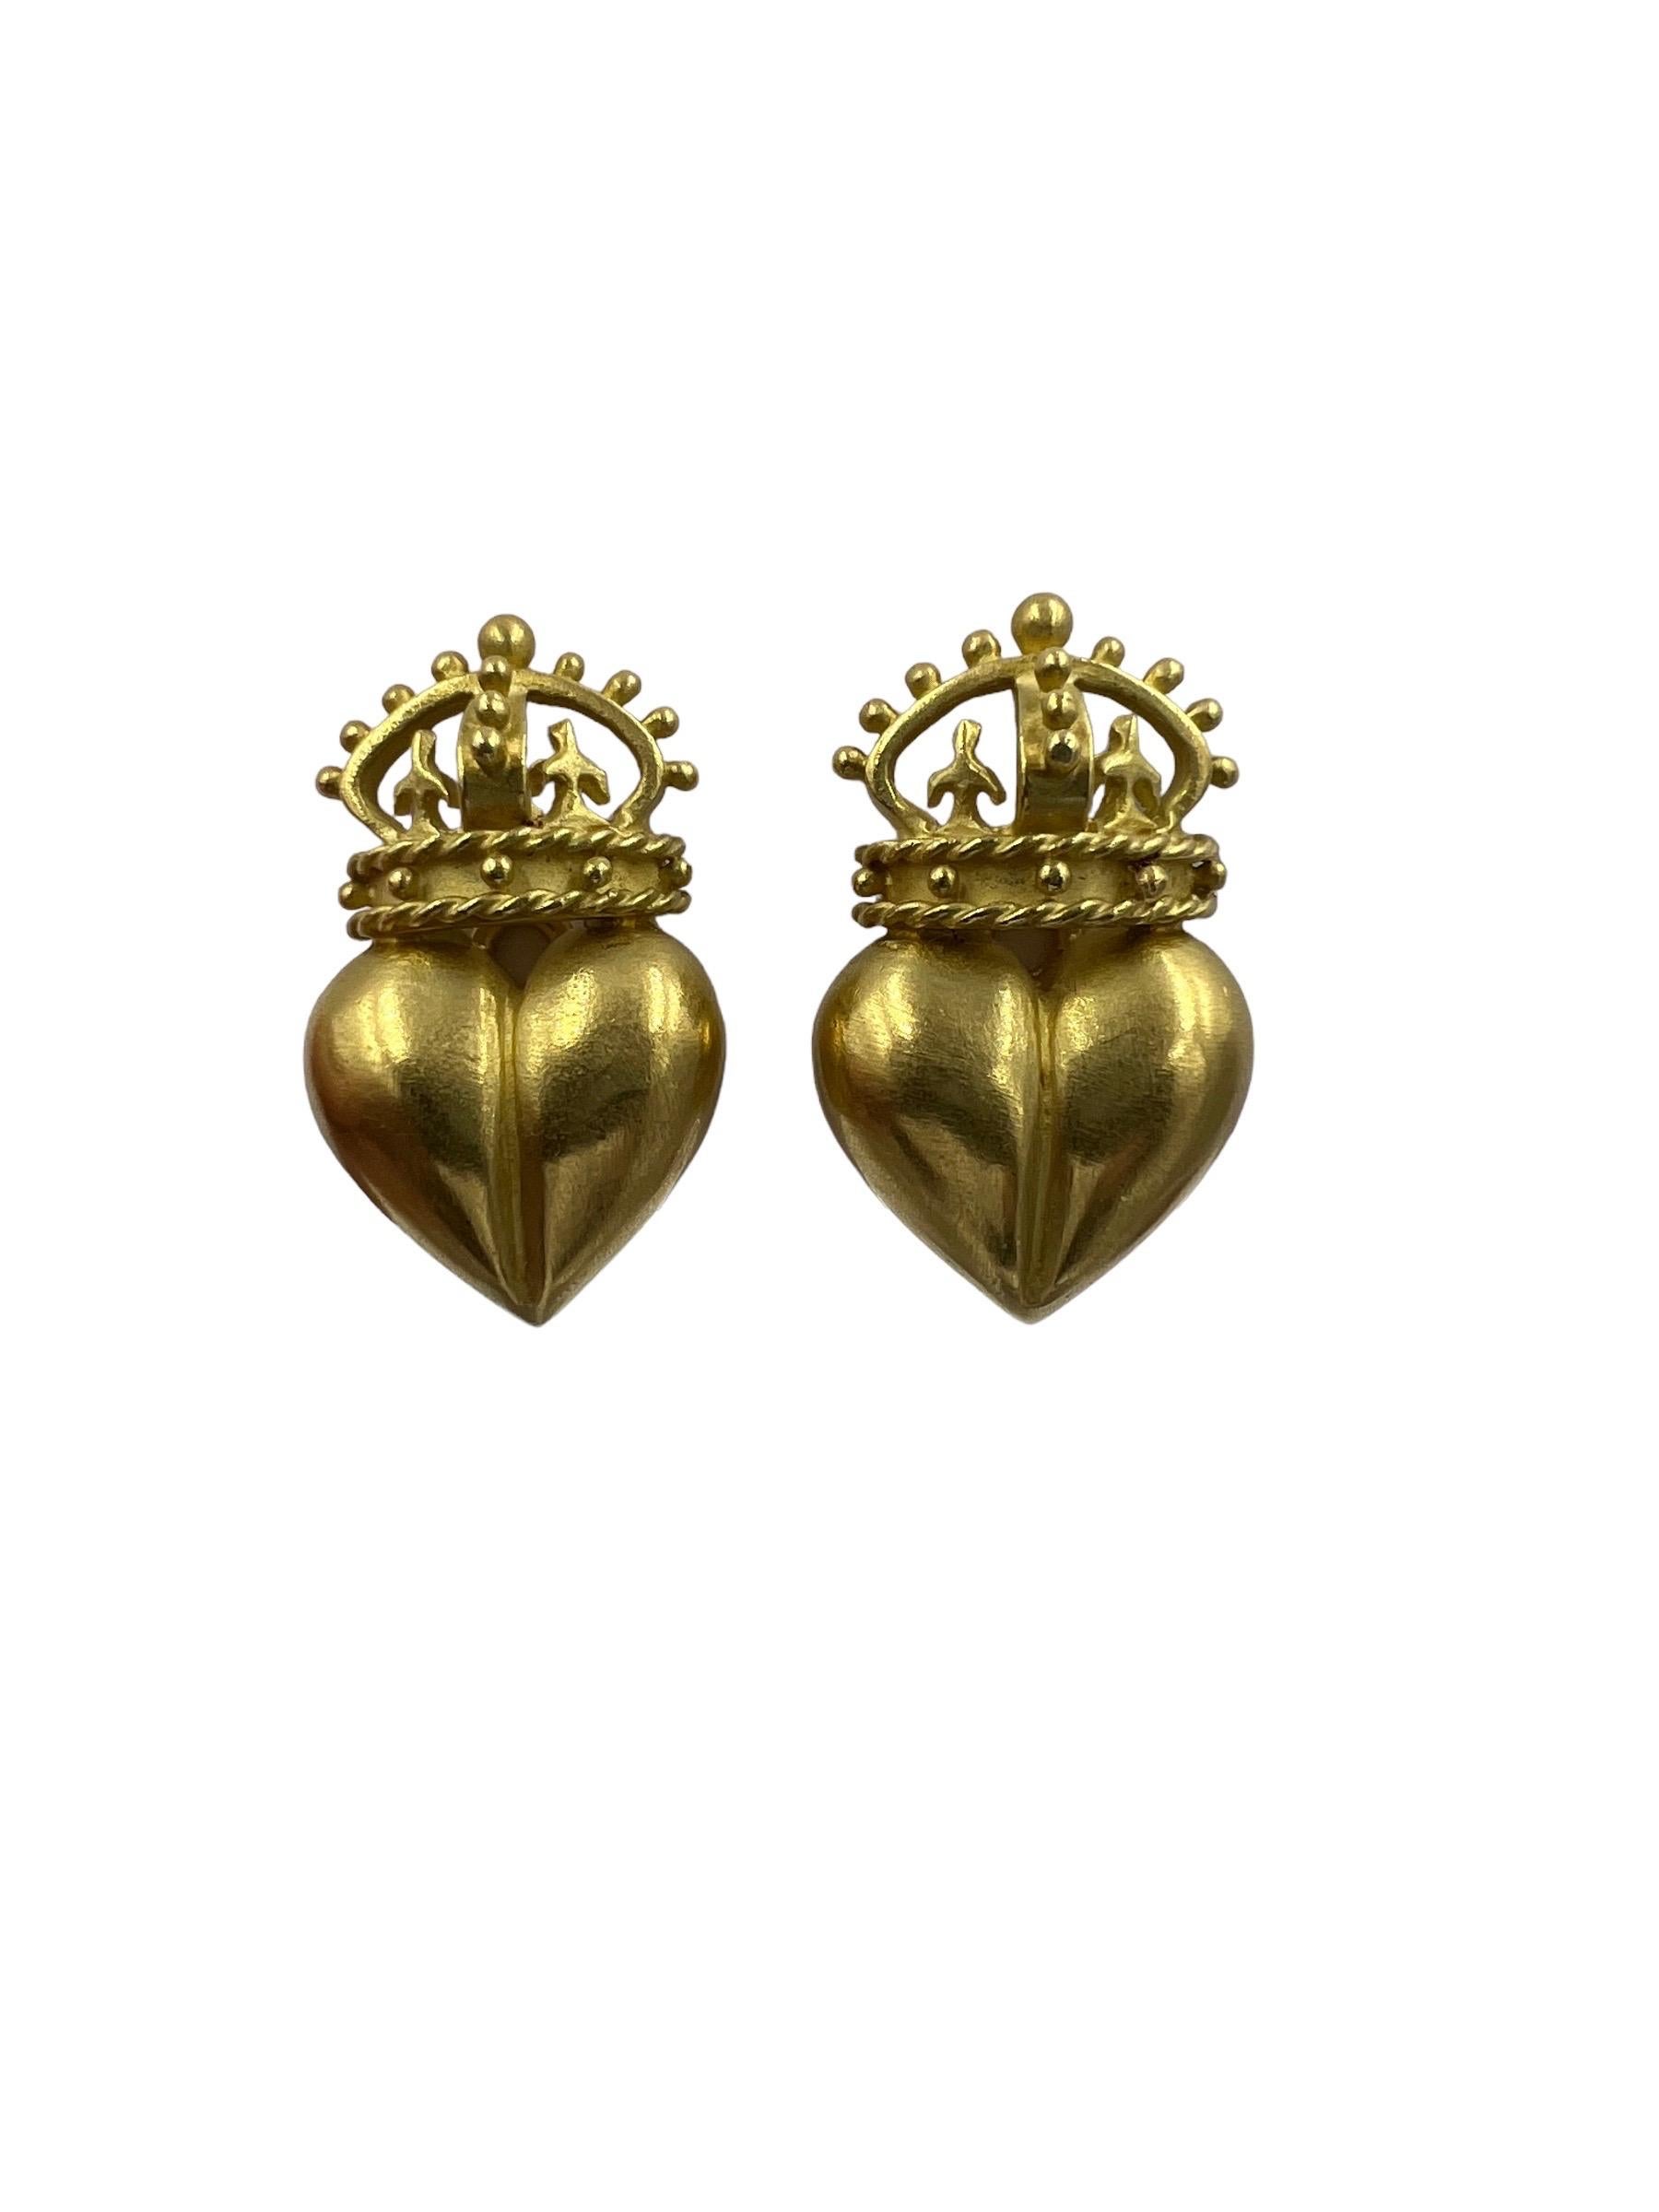 Crown and Heart clip on 18k yellow gold earrings, circa 1990s.

ABOUT THIS ITEM:   E-DJ921B   Enchanting crown and heart clip-on earrings.  An everyday earring for that sophisticated look.
          Very comfortable.
SPECIFICATIONS:

METAL:  18K